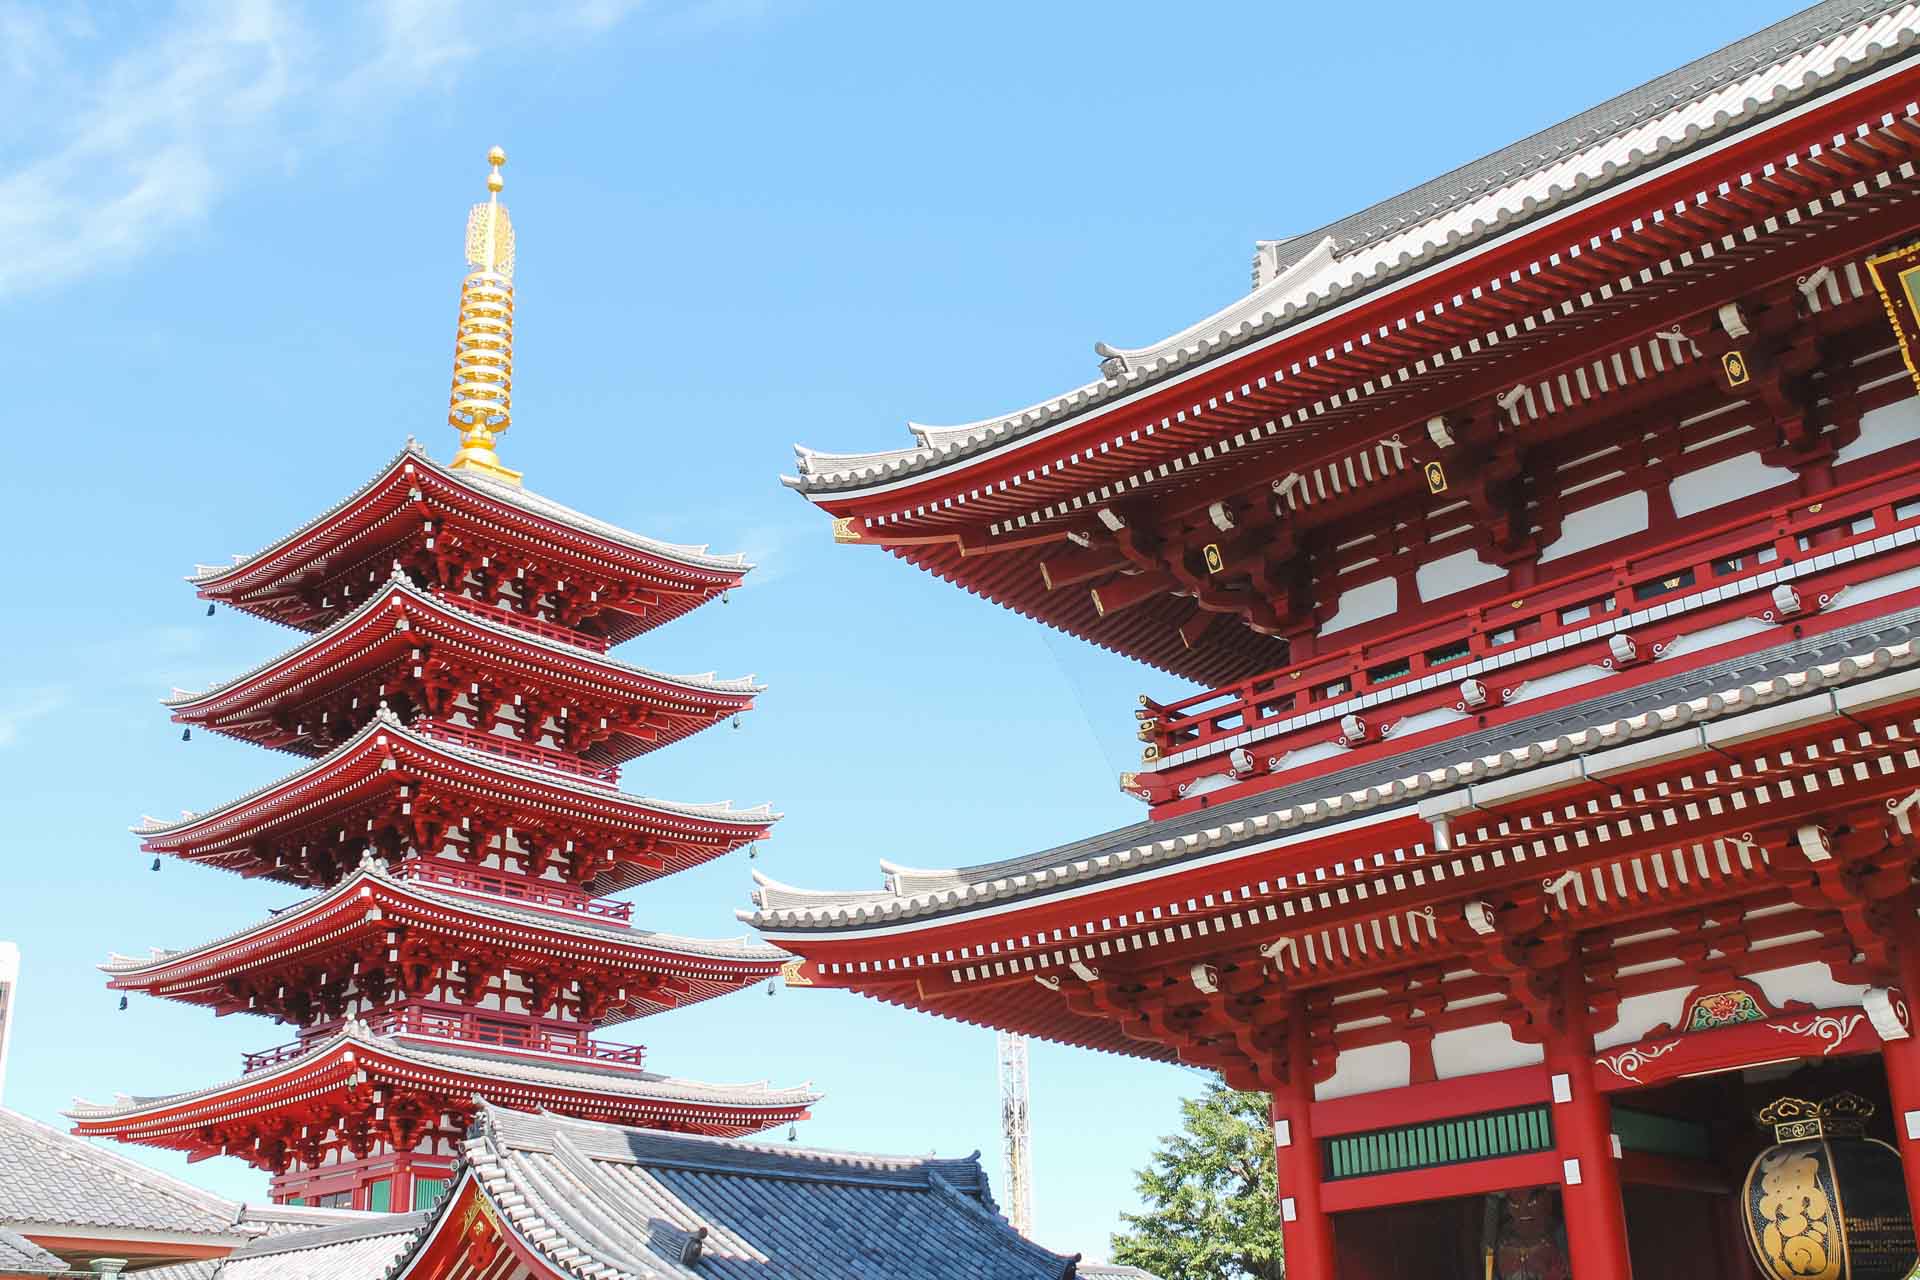 The traditional Japanese red pagoda and temple usually found at Shinto shrines in Japan.